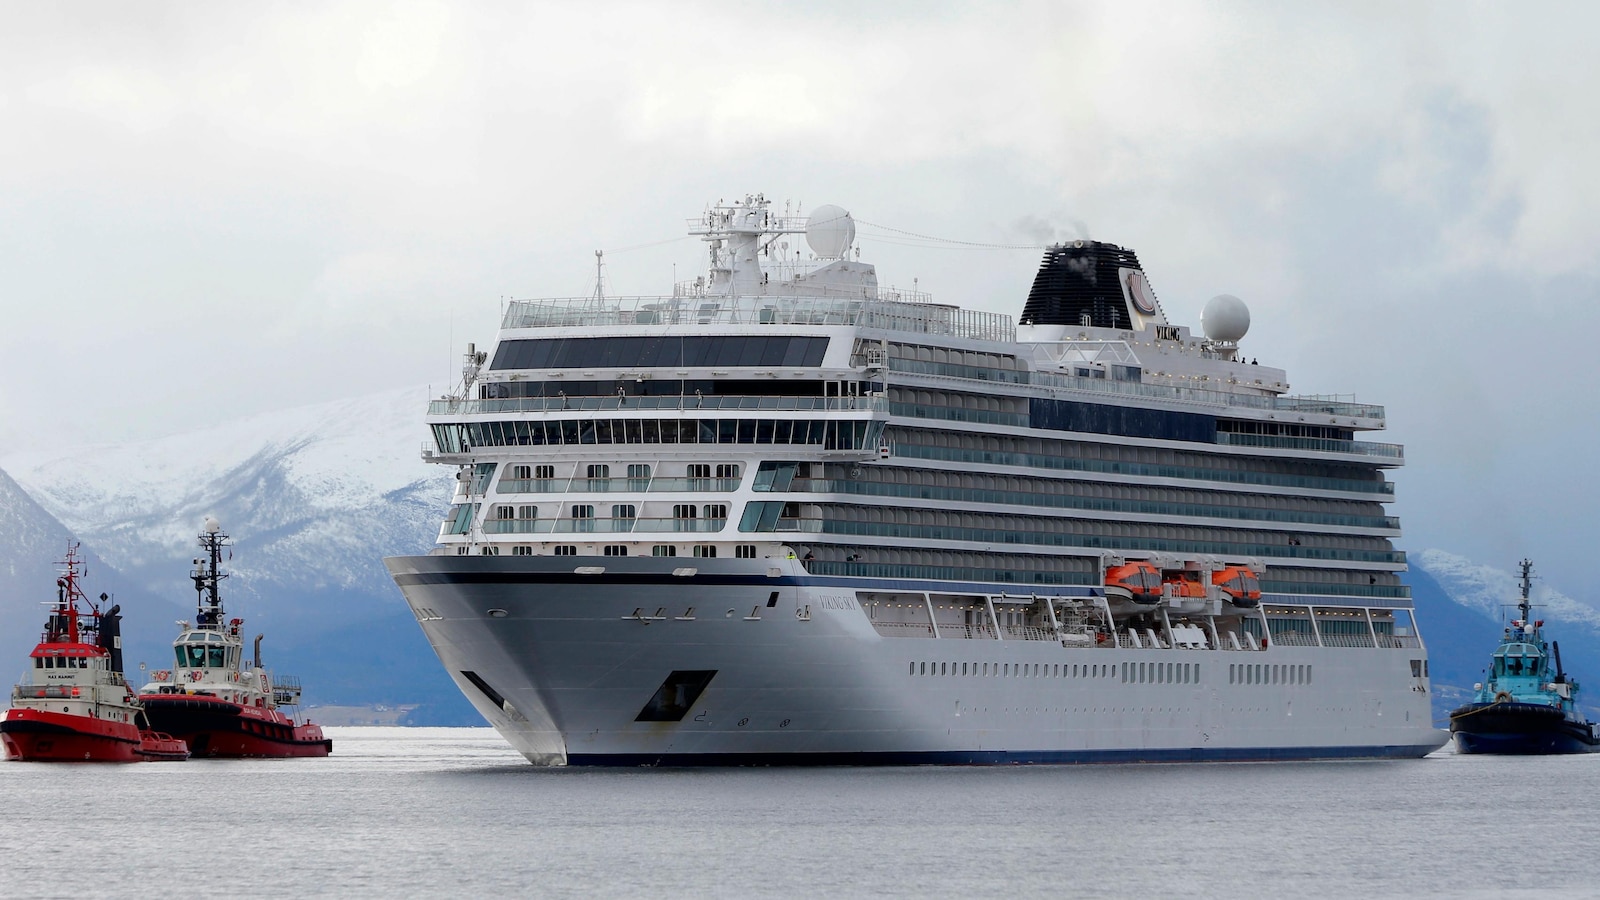 Norwegian safety organization criticizes cruise ship for close call during 2019 storm